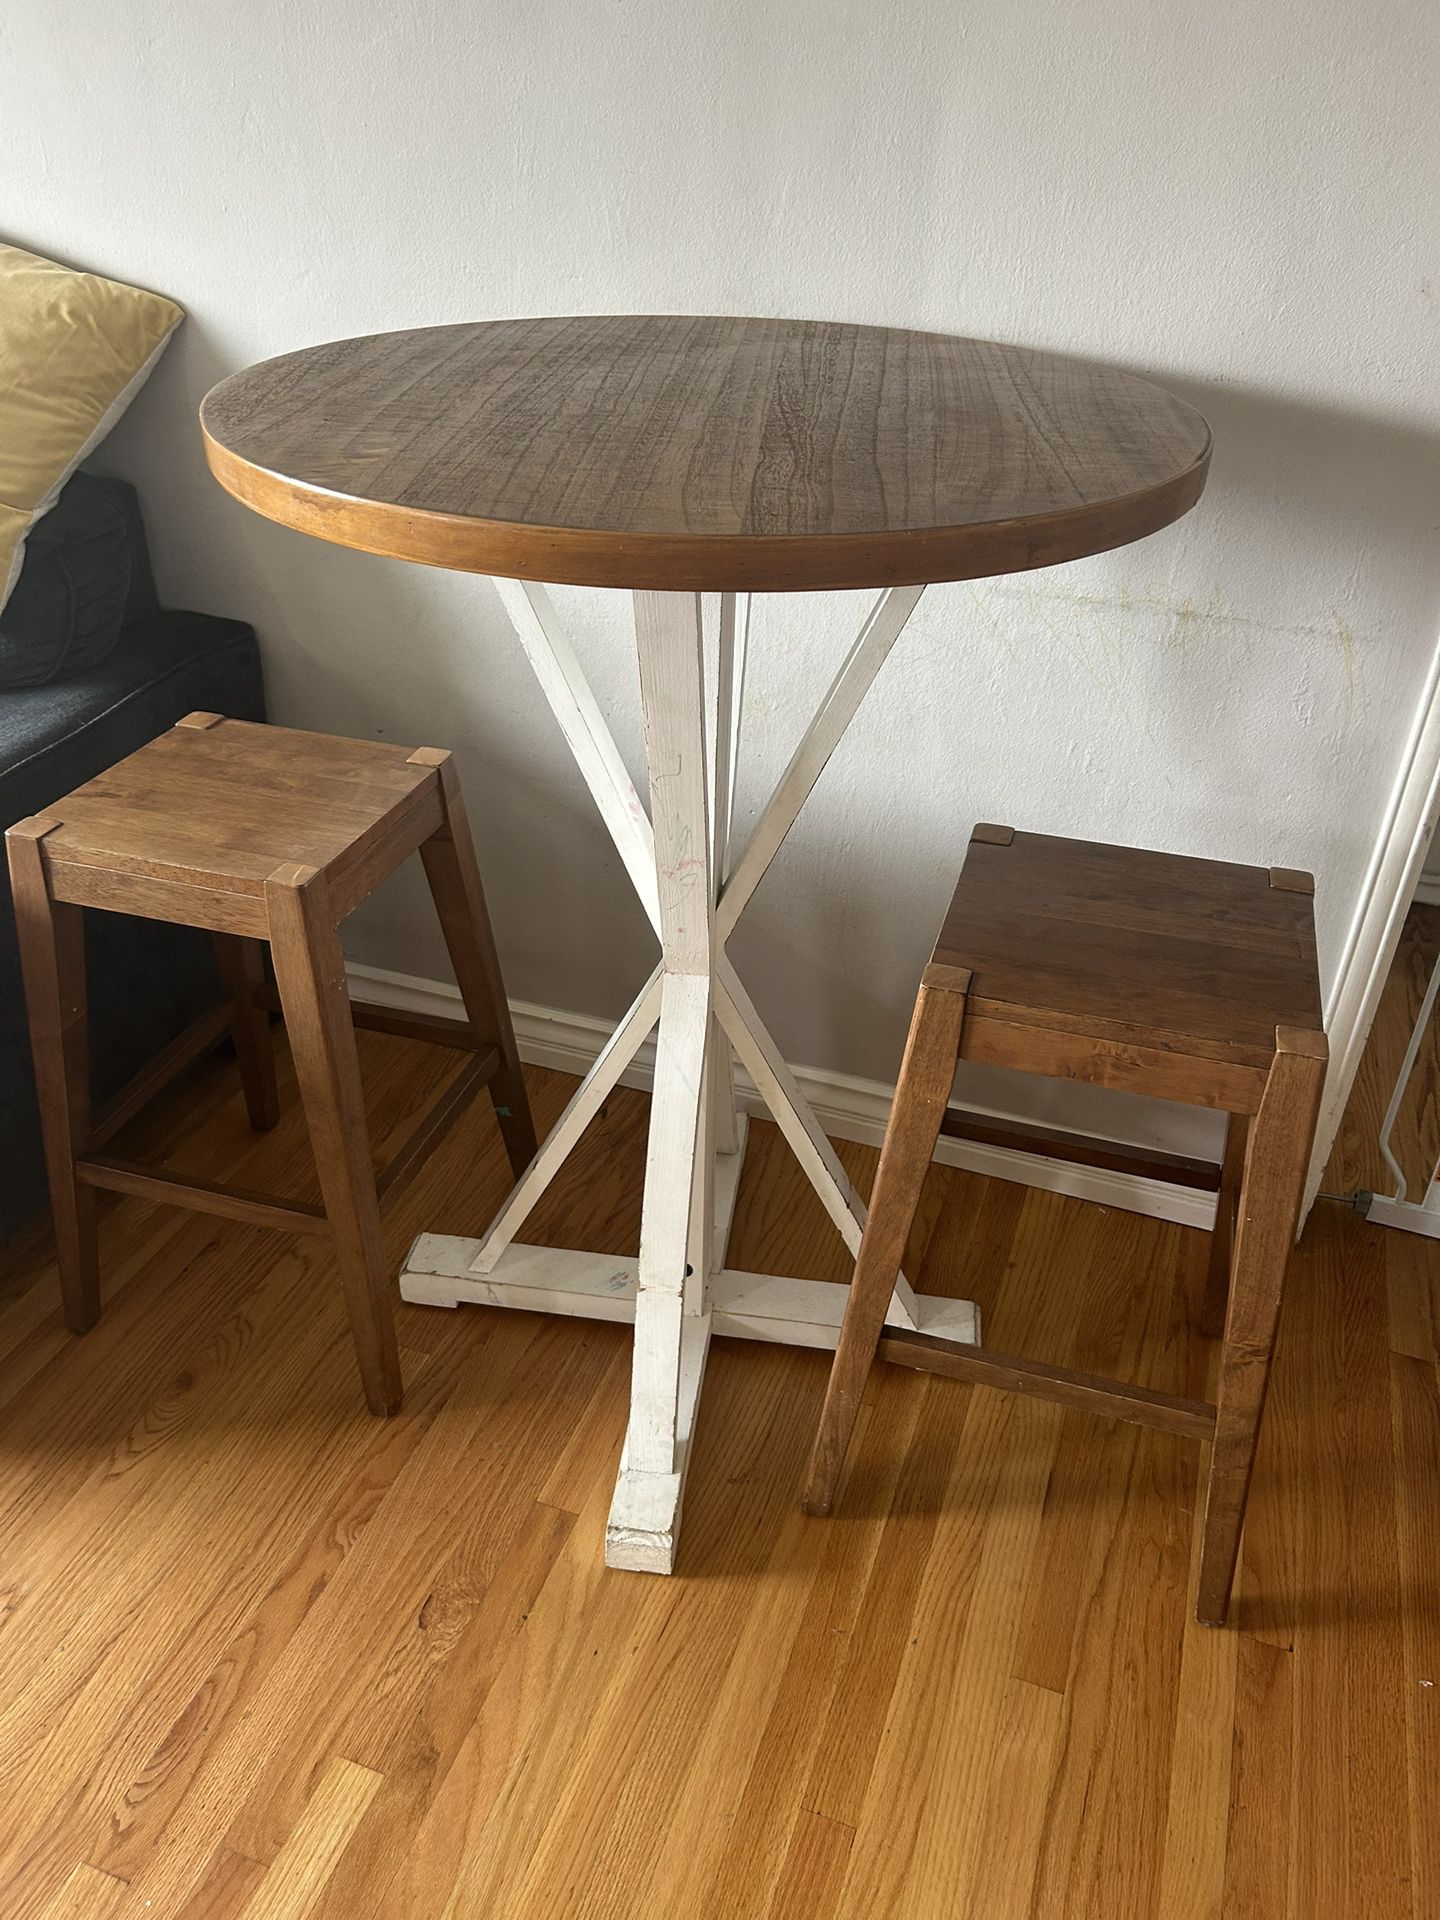 Farmhouse Breakfast Top Table With Stools